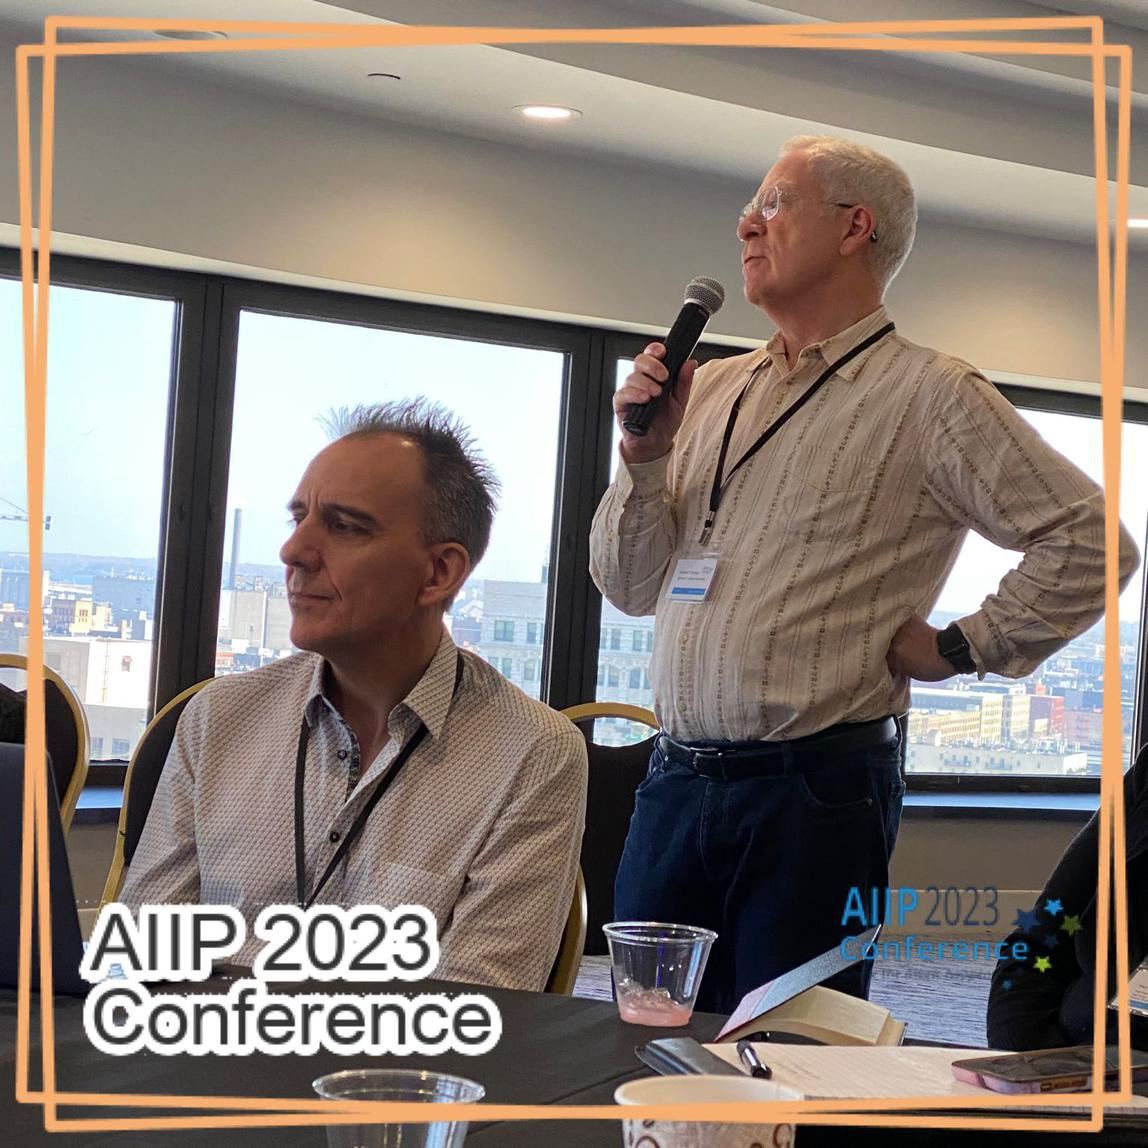 Q&A at an AIIP23 session